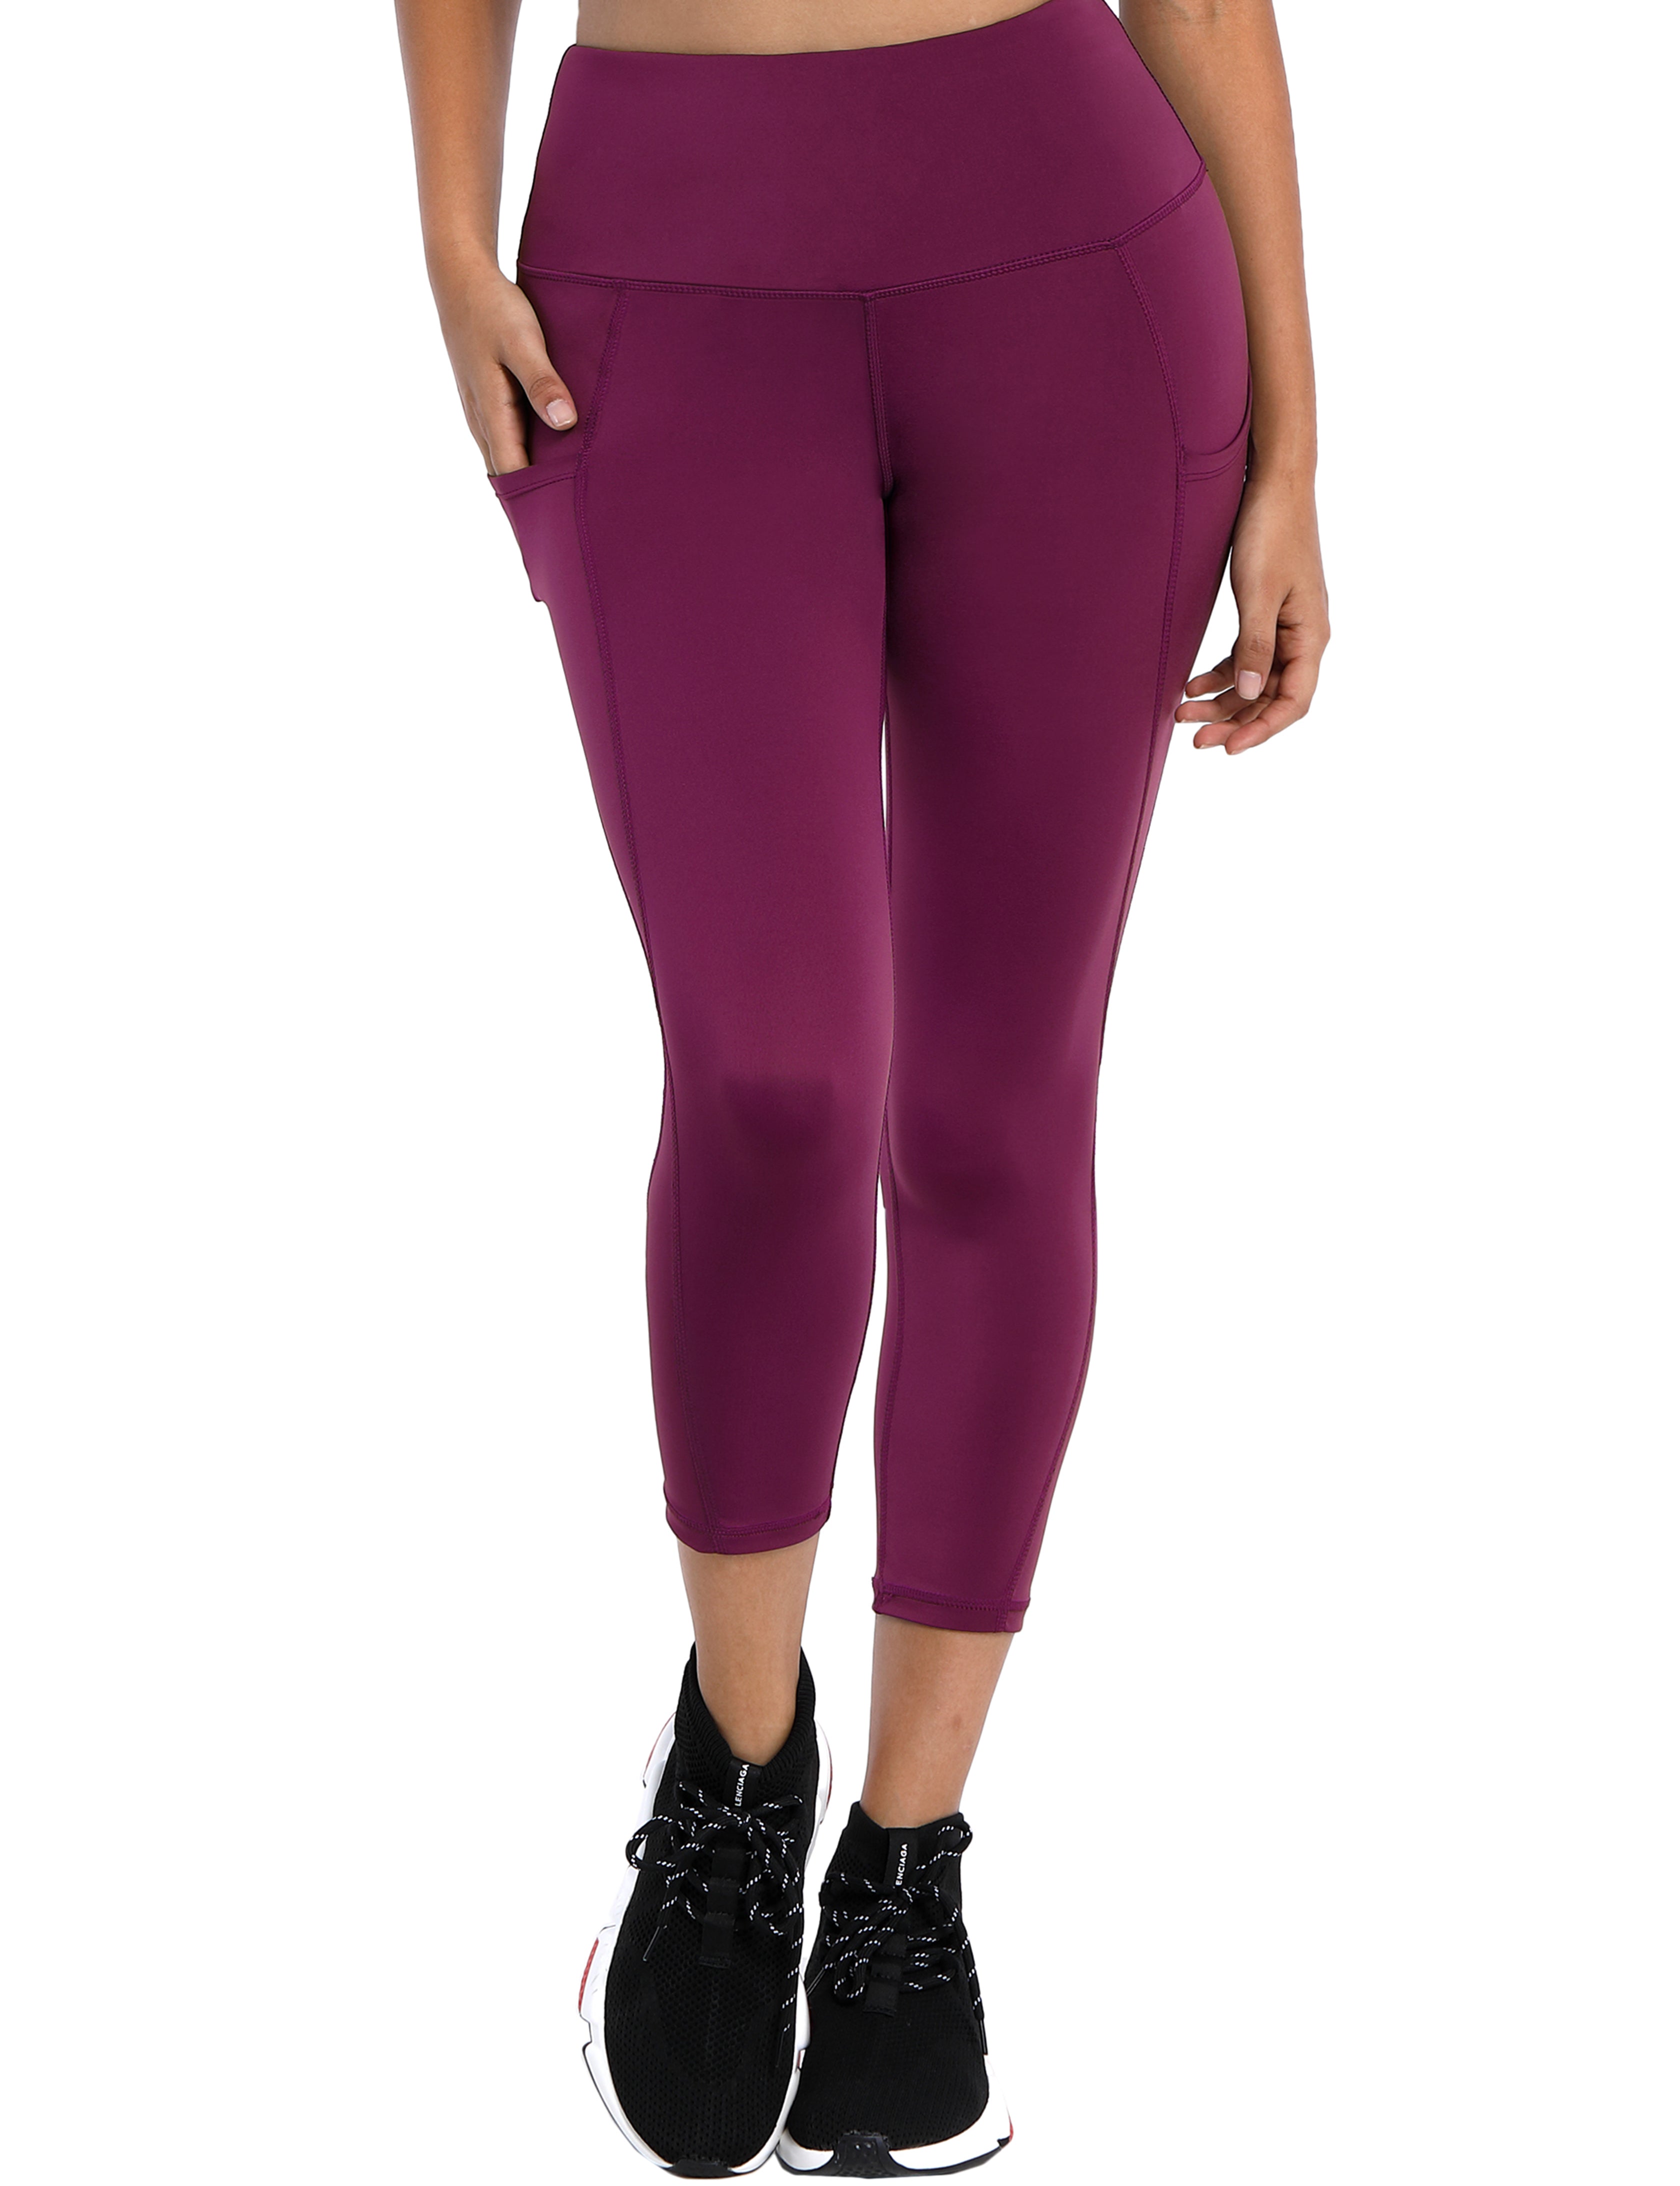 22" High Waist Side Pockets Capris grapevine 75%Nylon/25%Spandex Fabric doesn't attract lint easily 4-way stretch No see-through Moisture-wicking Tummy control Inner pocket